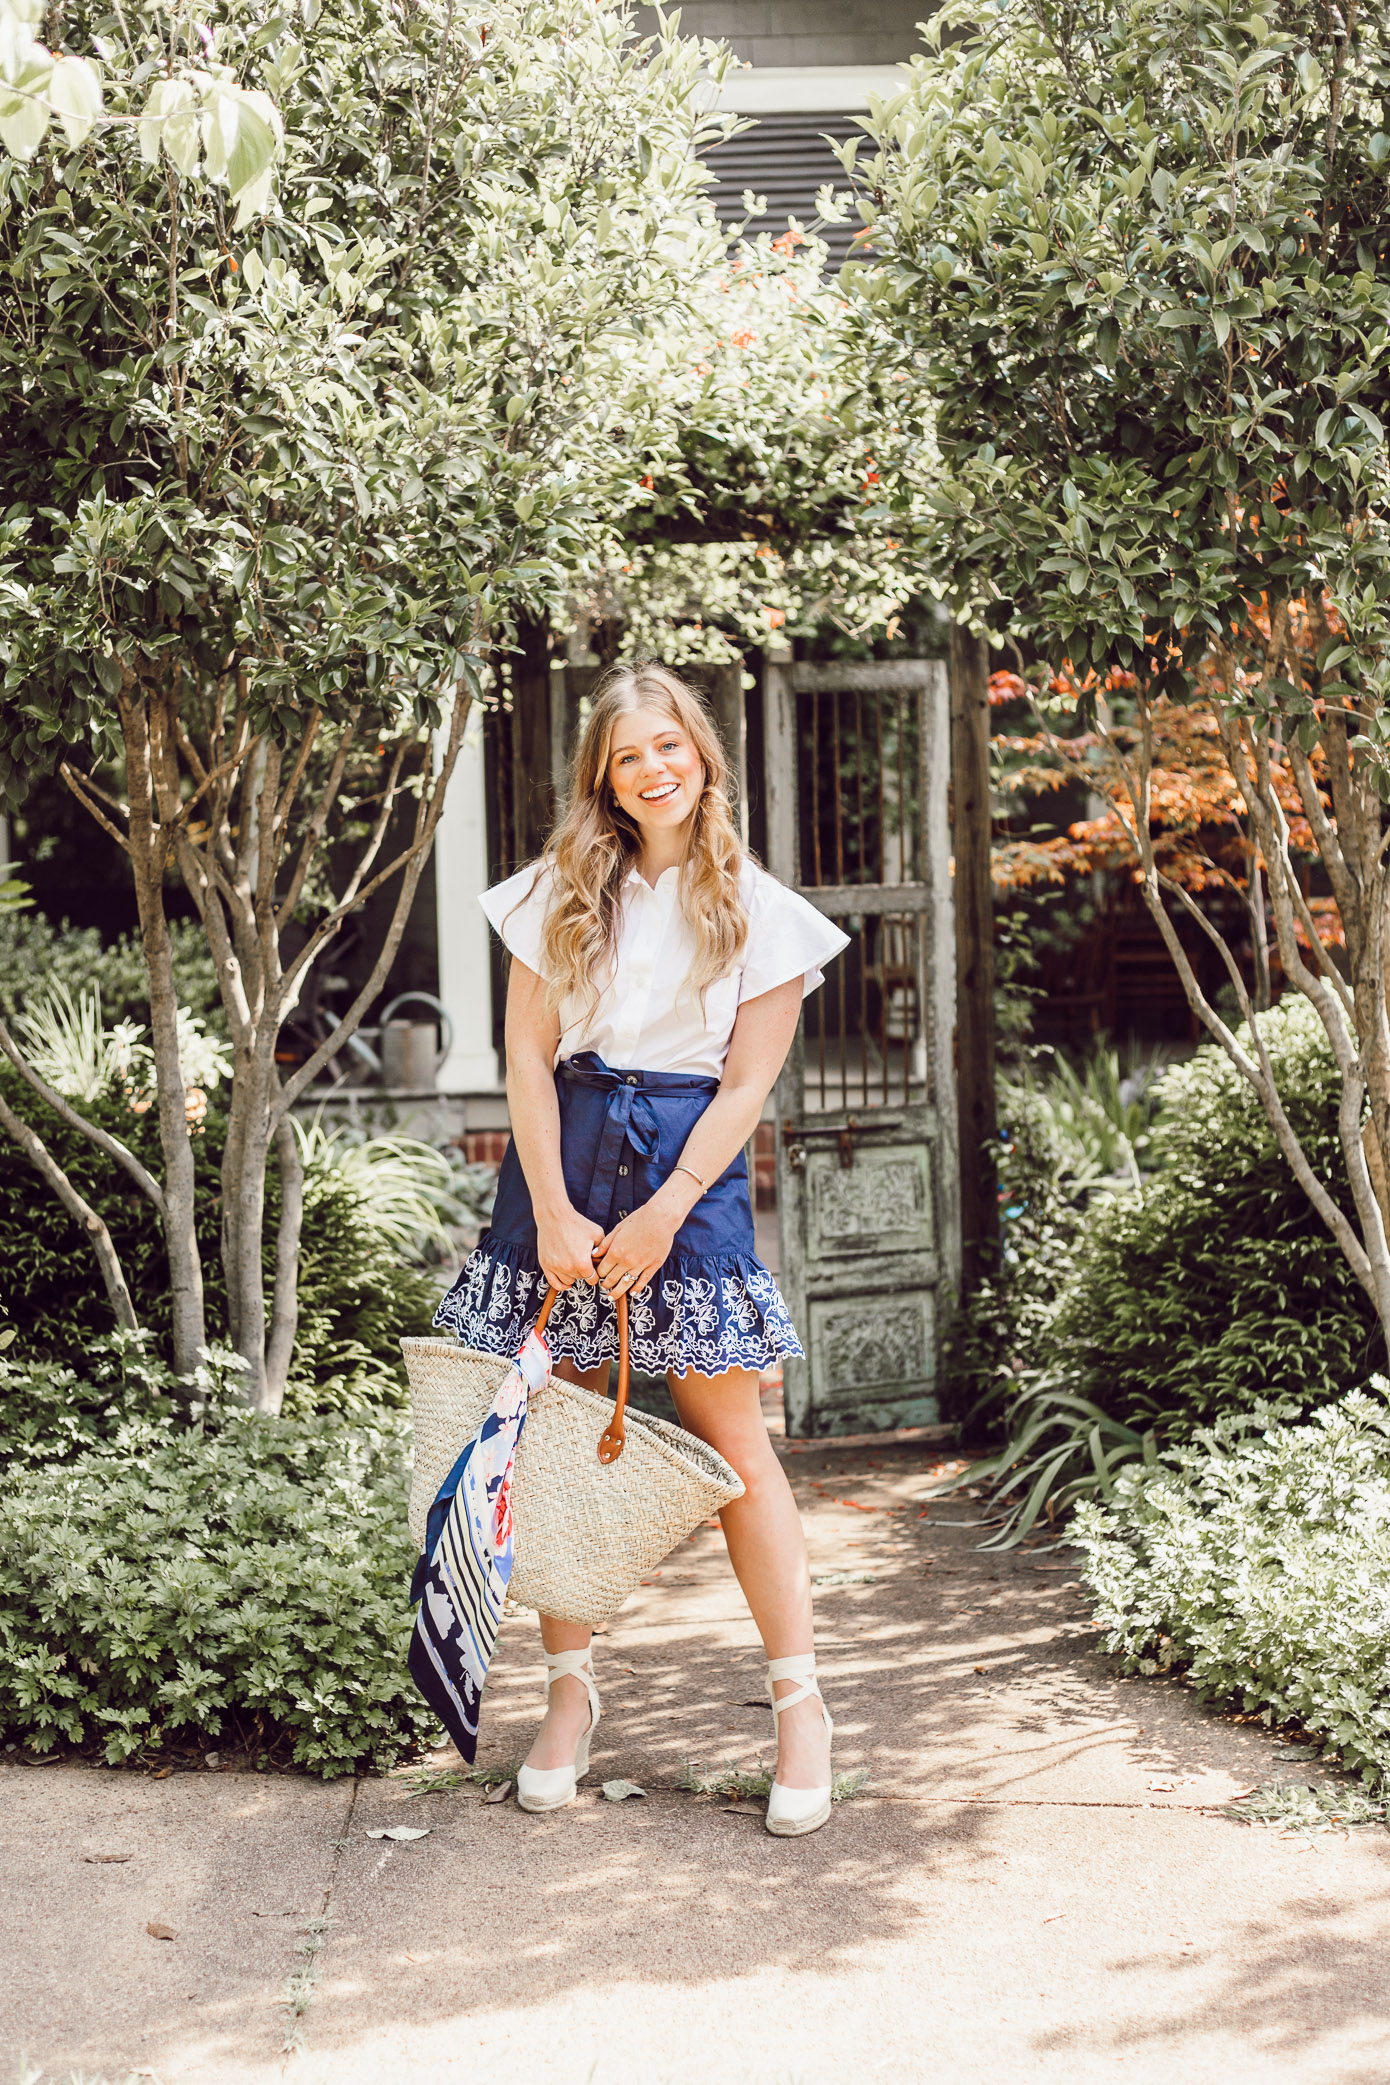 Southern Summer Style | Draper James Summer Arrivals | Louella Reese Life & Style Blog